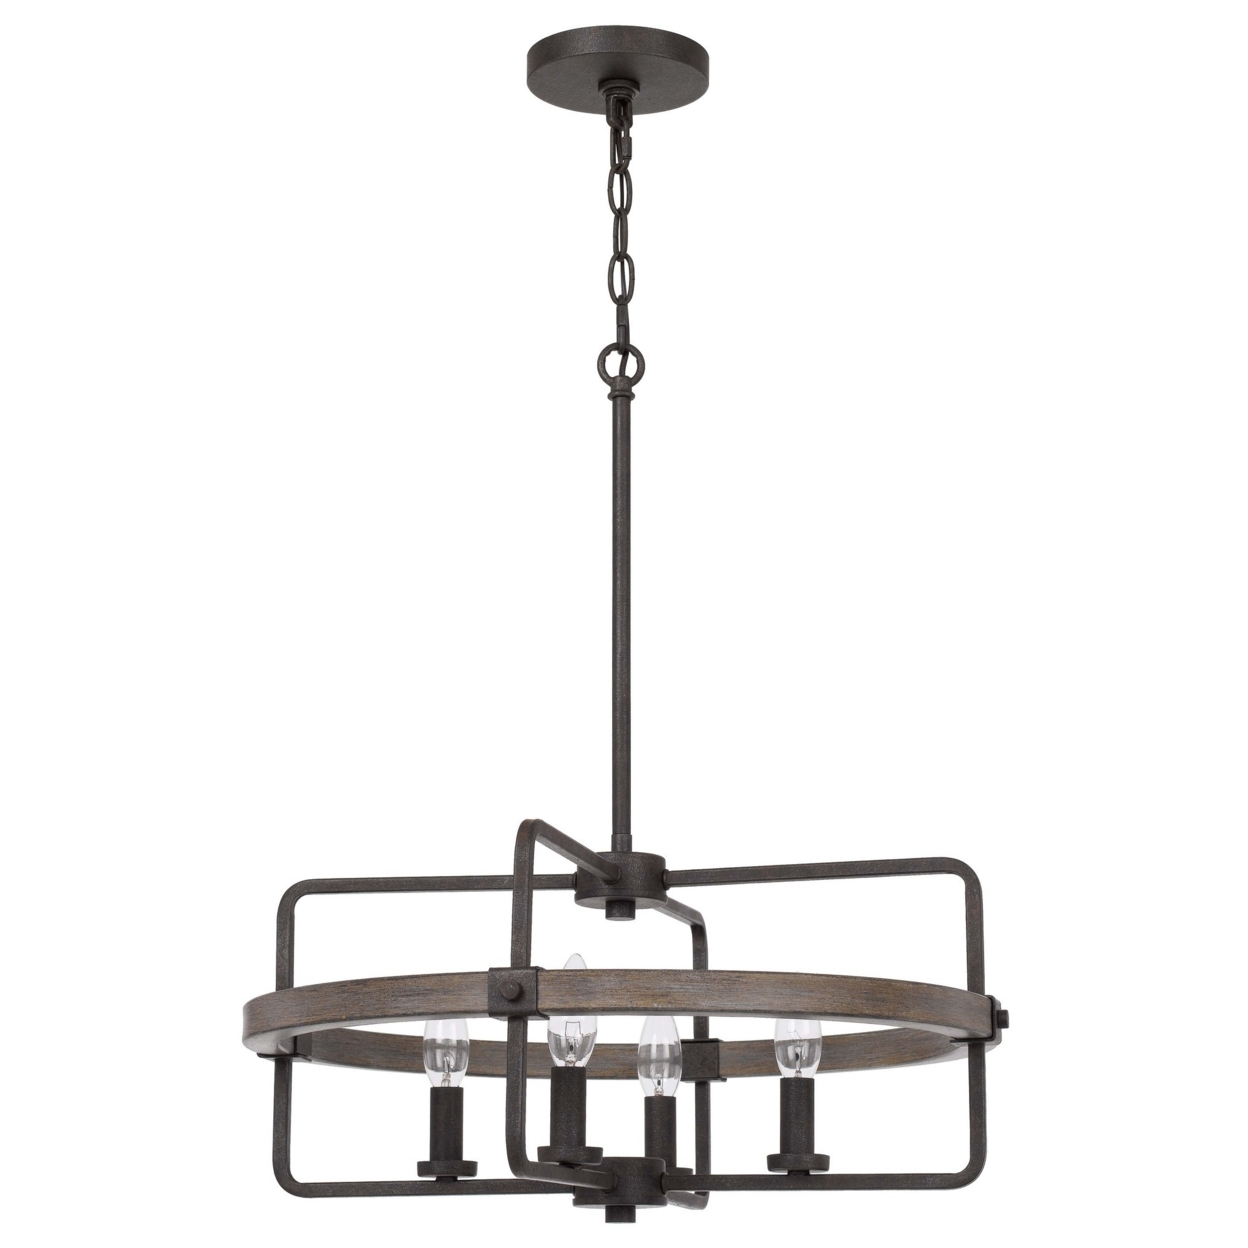 Chandelier With Round Wooden Frame And Metal Support, Gray And Black- Saltoro Sherpi